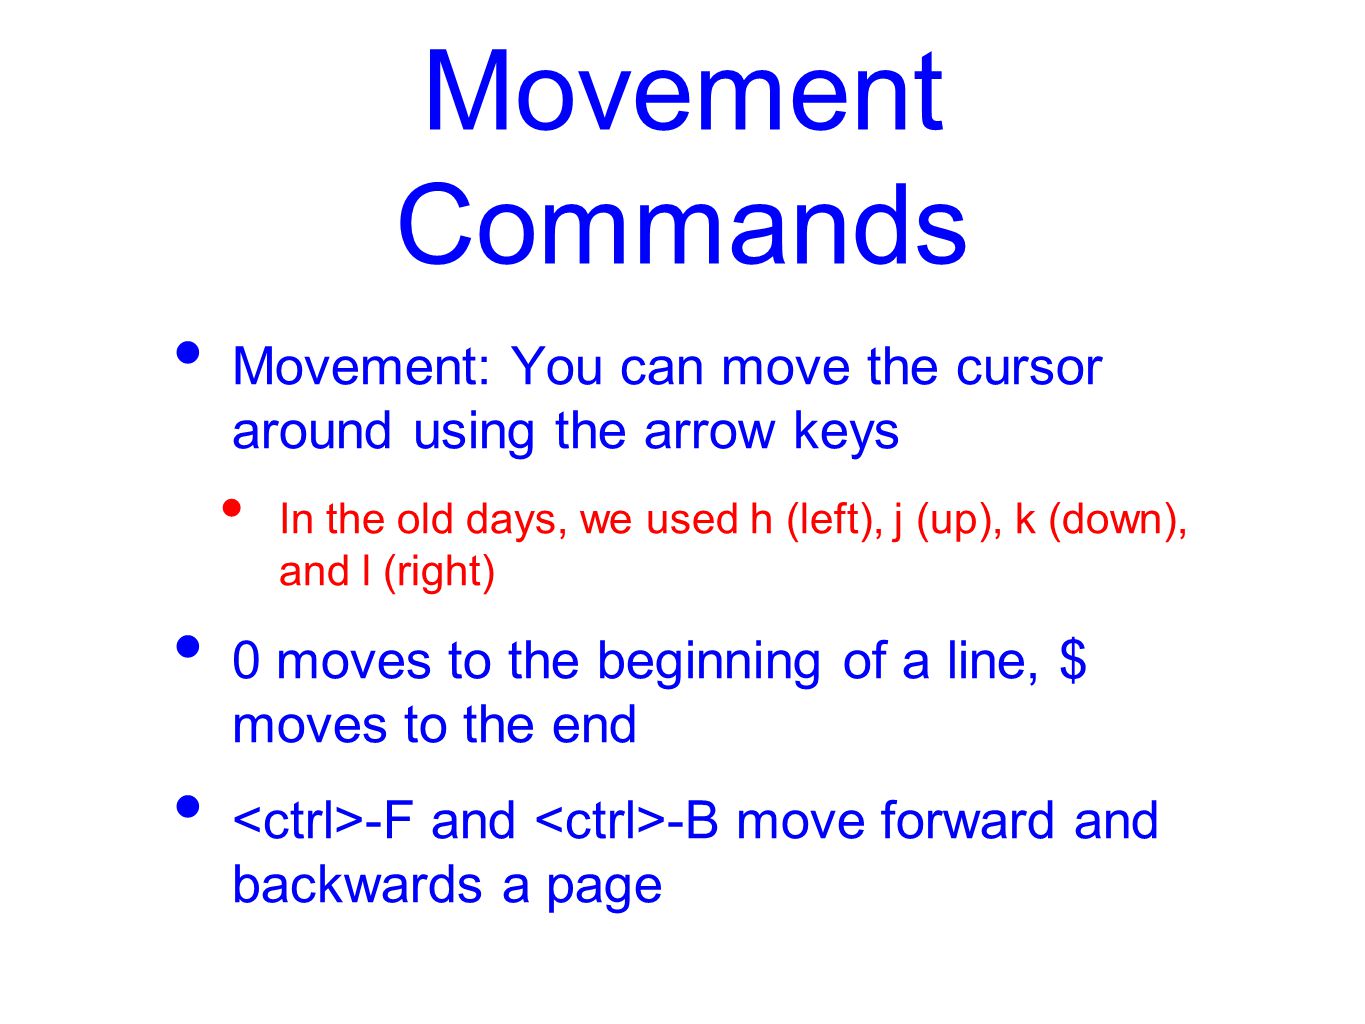 Movement Commands Movement: You can move the cursor around using the arrow keys In the old days, we used h (left), j (up), k (down), and l (right) 0 moves to the beginning of a line, $ moves to the end -F and -B move forward and backwards a page